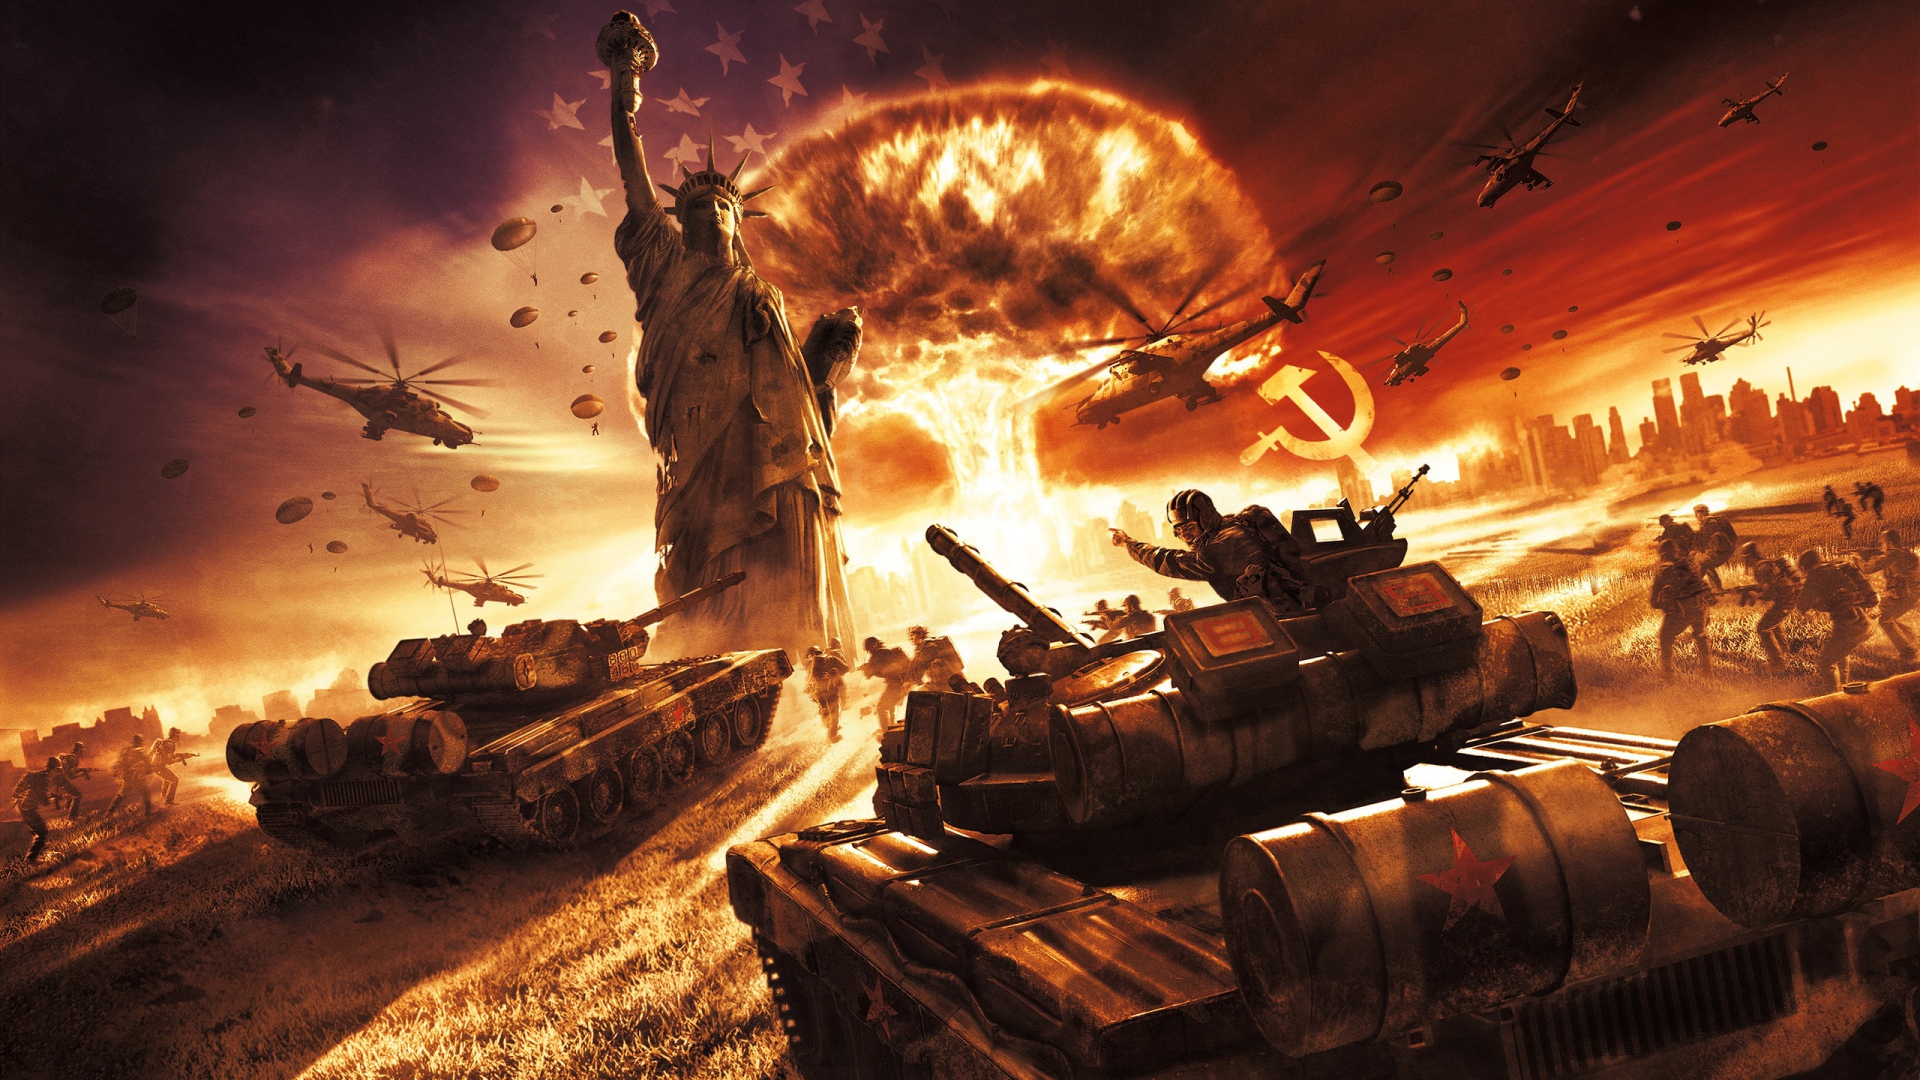 Full HD Wallpaper world in conflict battle statue of